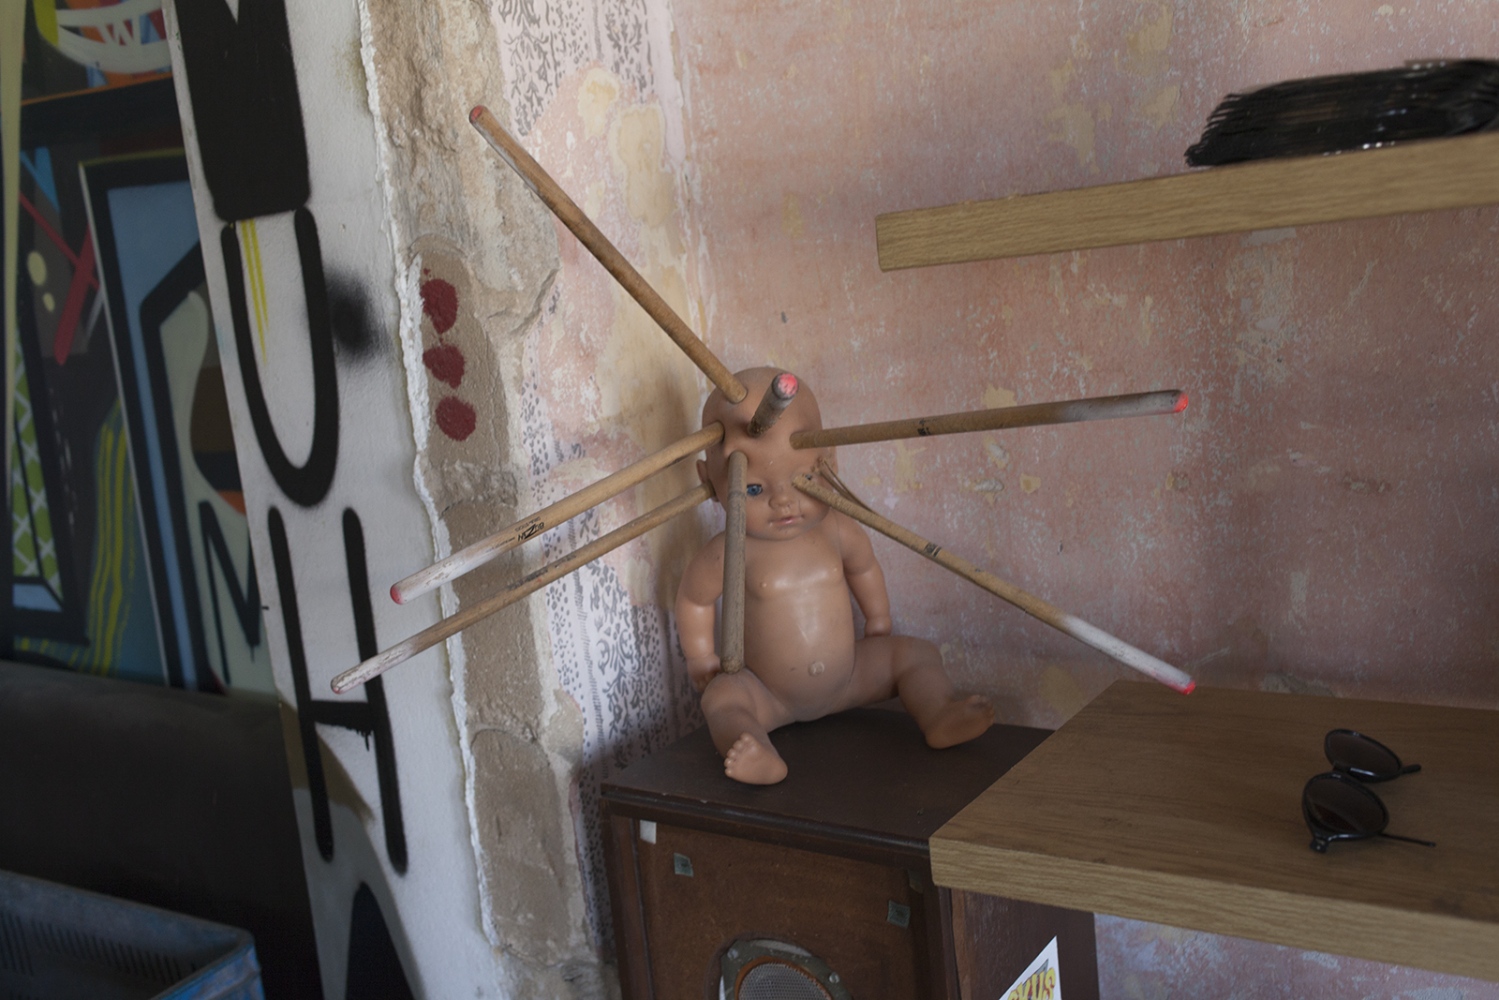 Danger of Death (ongoing) - Art form a squatted collective apartment, where a few...